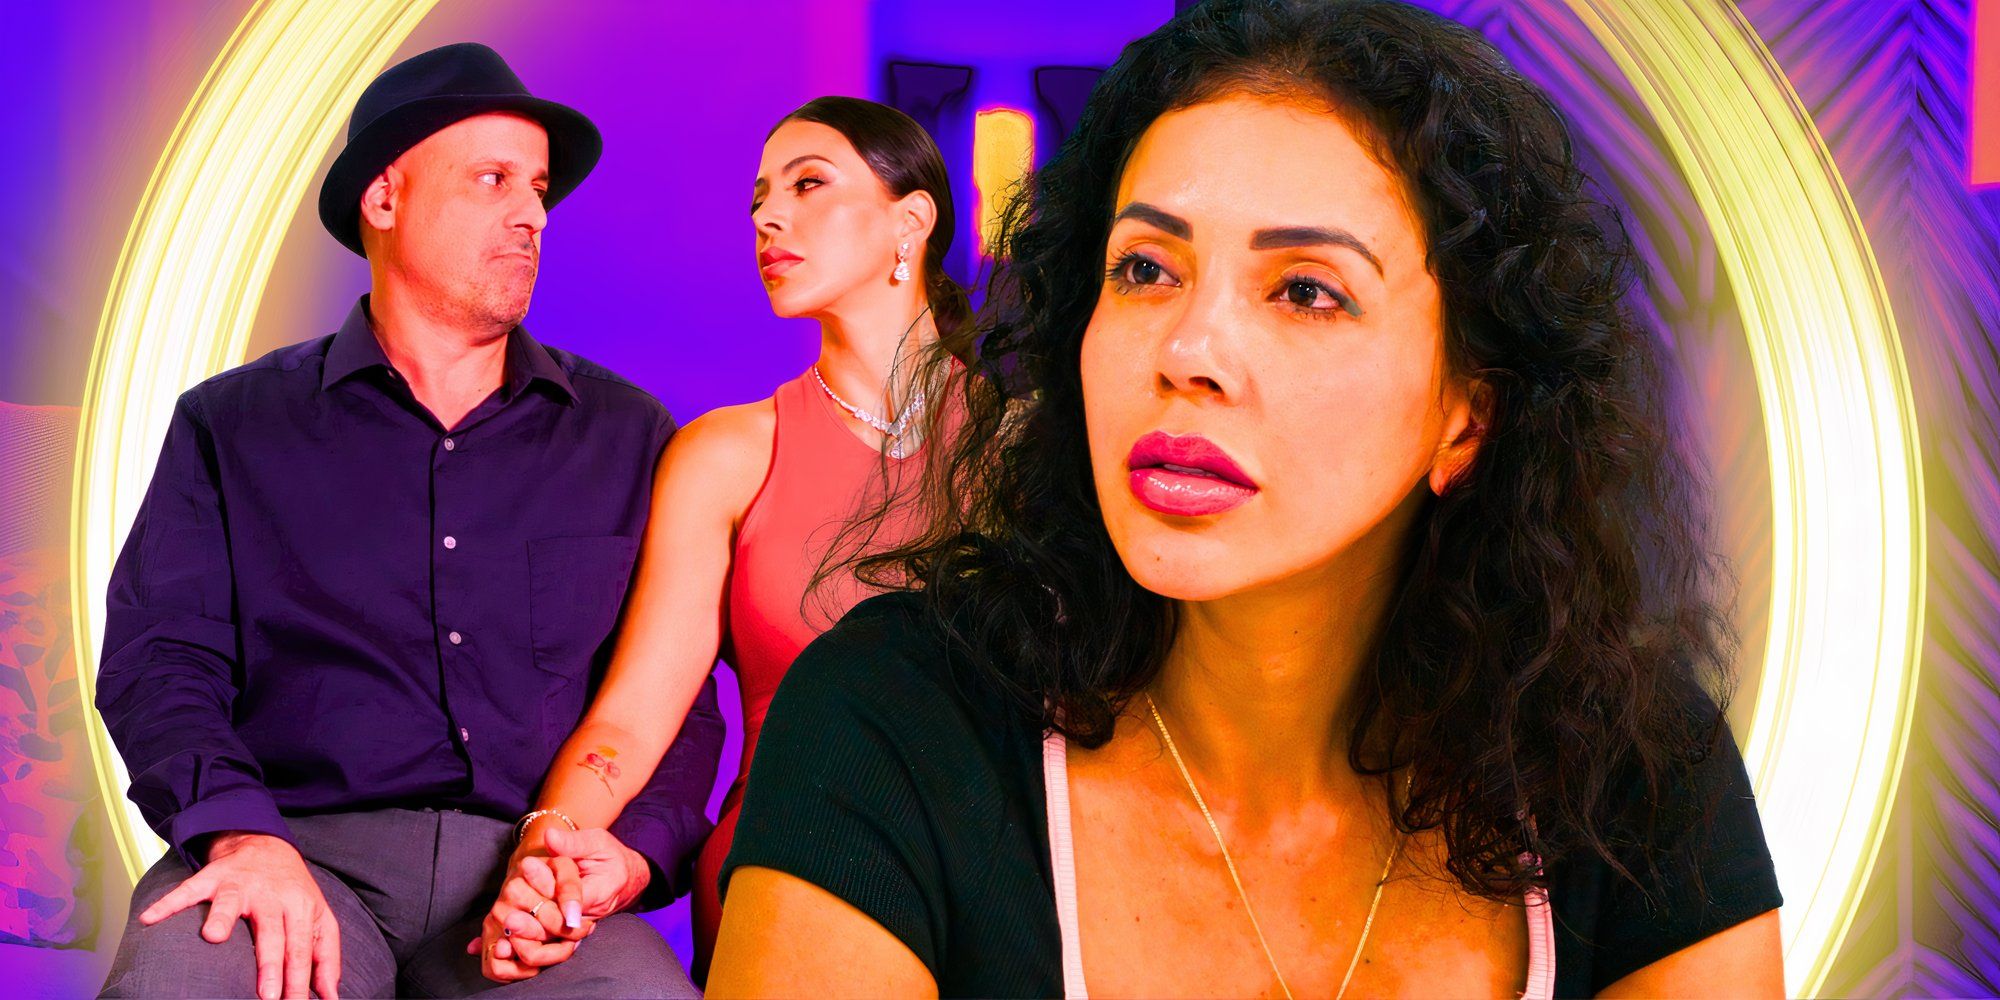 90 Day Fiance's Jasmine Pineda looks serious in front of a group shot of Gino Palazzolo and Jasmine holding hands.